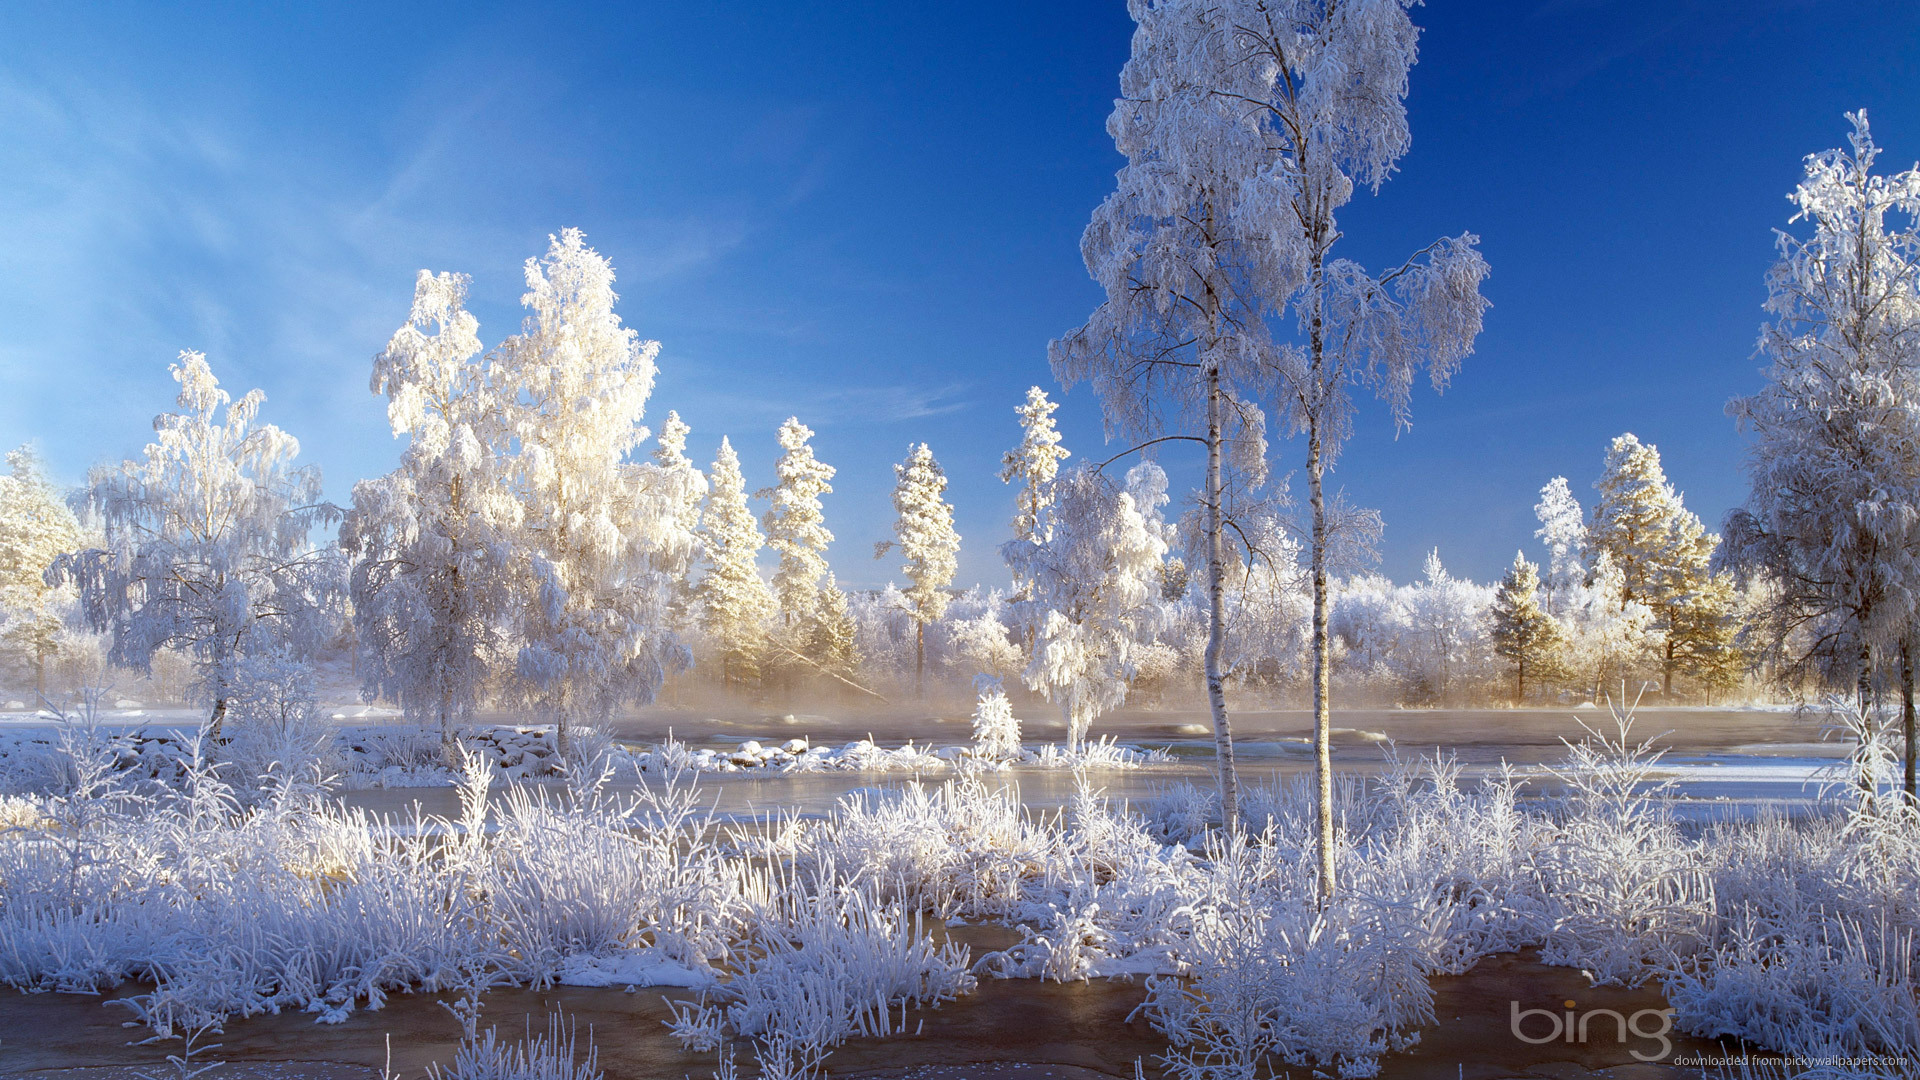 Blackberry iPad Bing Winter Landscape Screensaver For Kindle3 And Dx